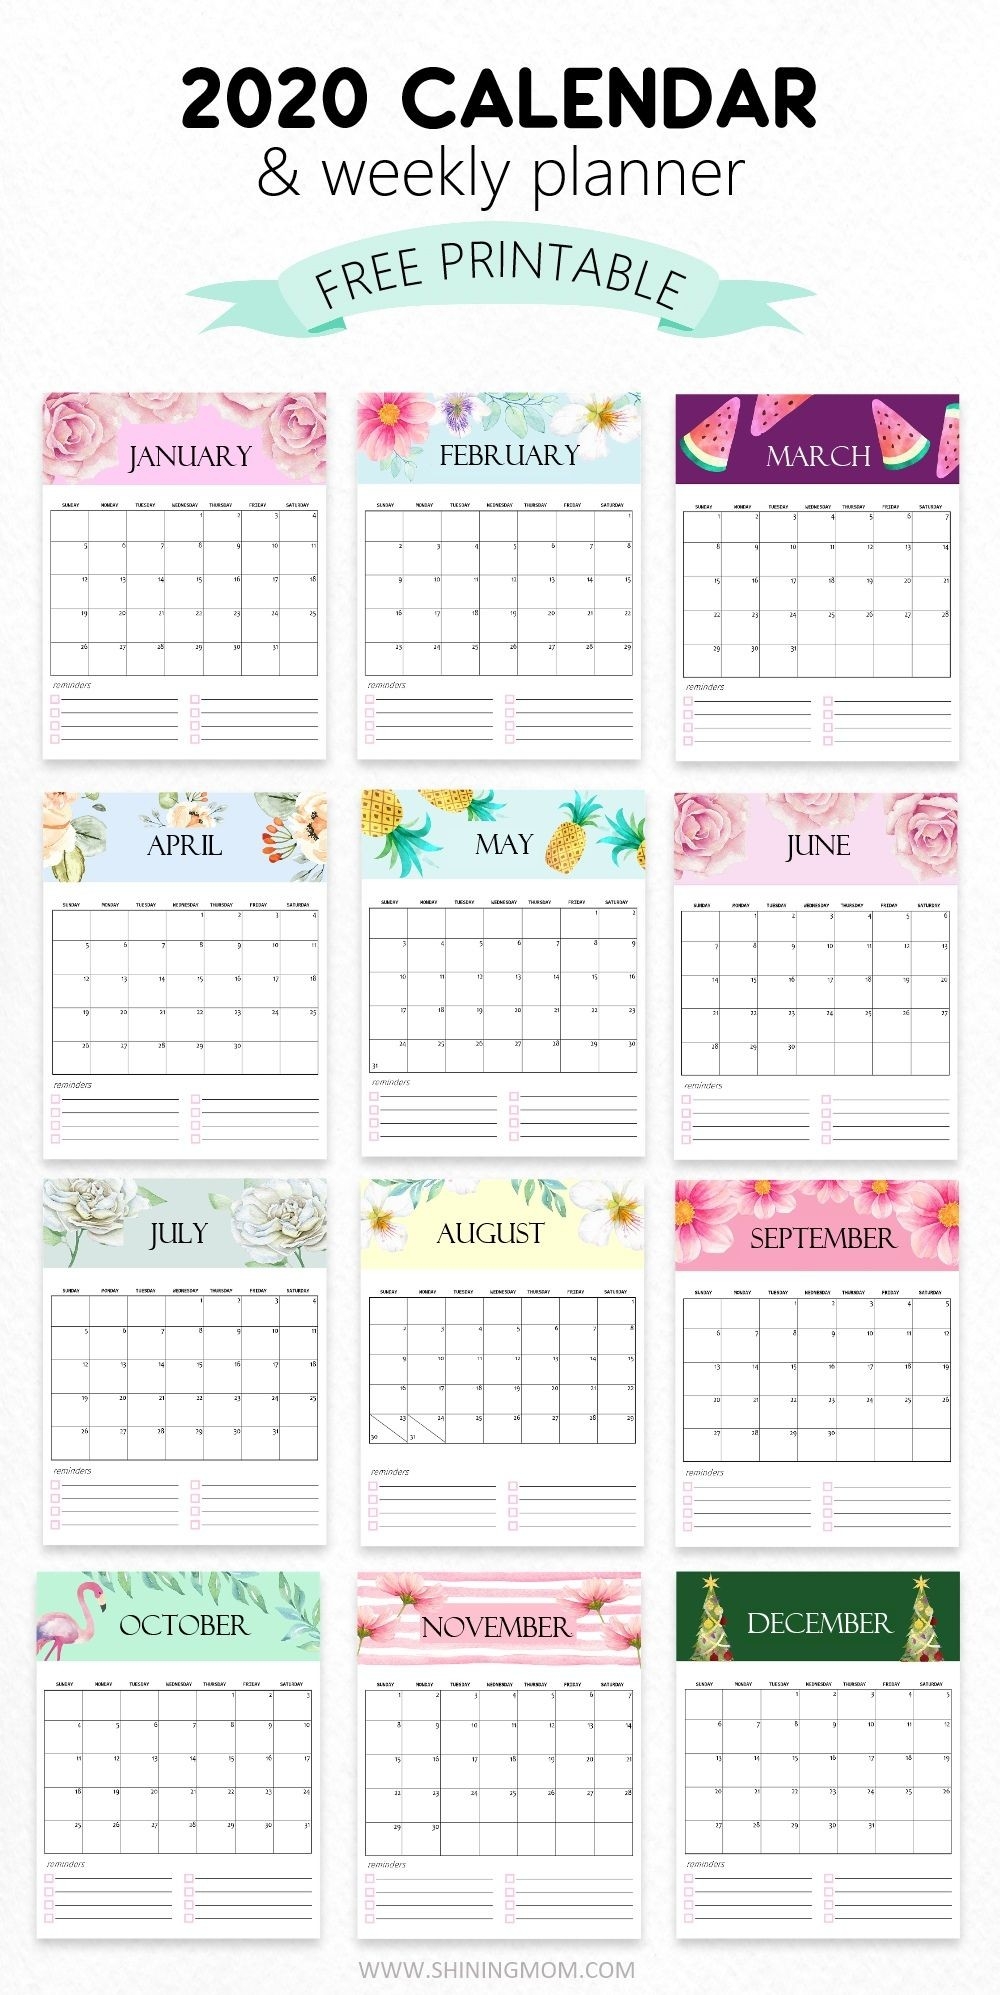 Free Calendar 2020 Printable: 12 Cute Monthly Designs To-Pretty Monthly Calendar 2020